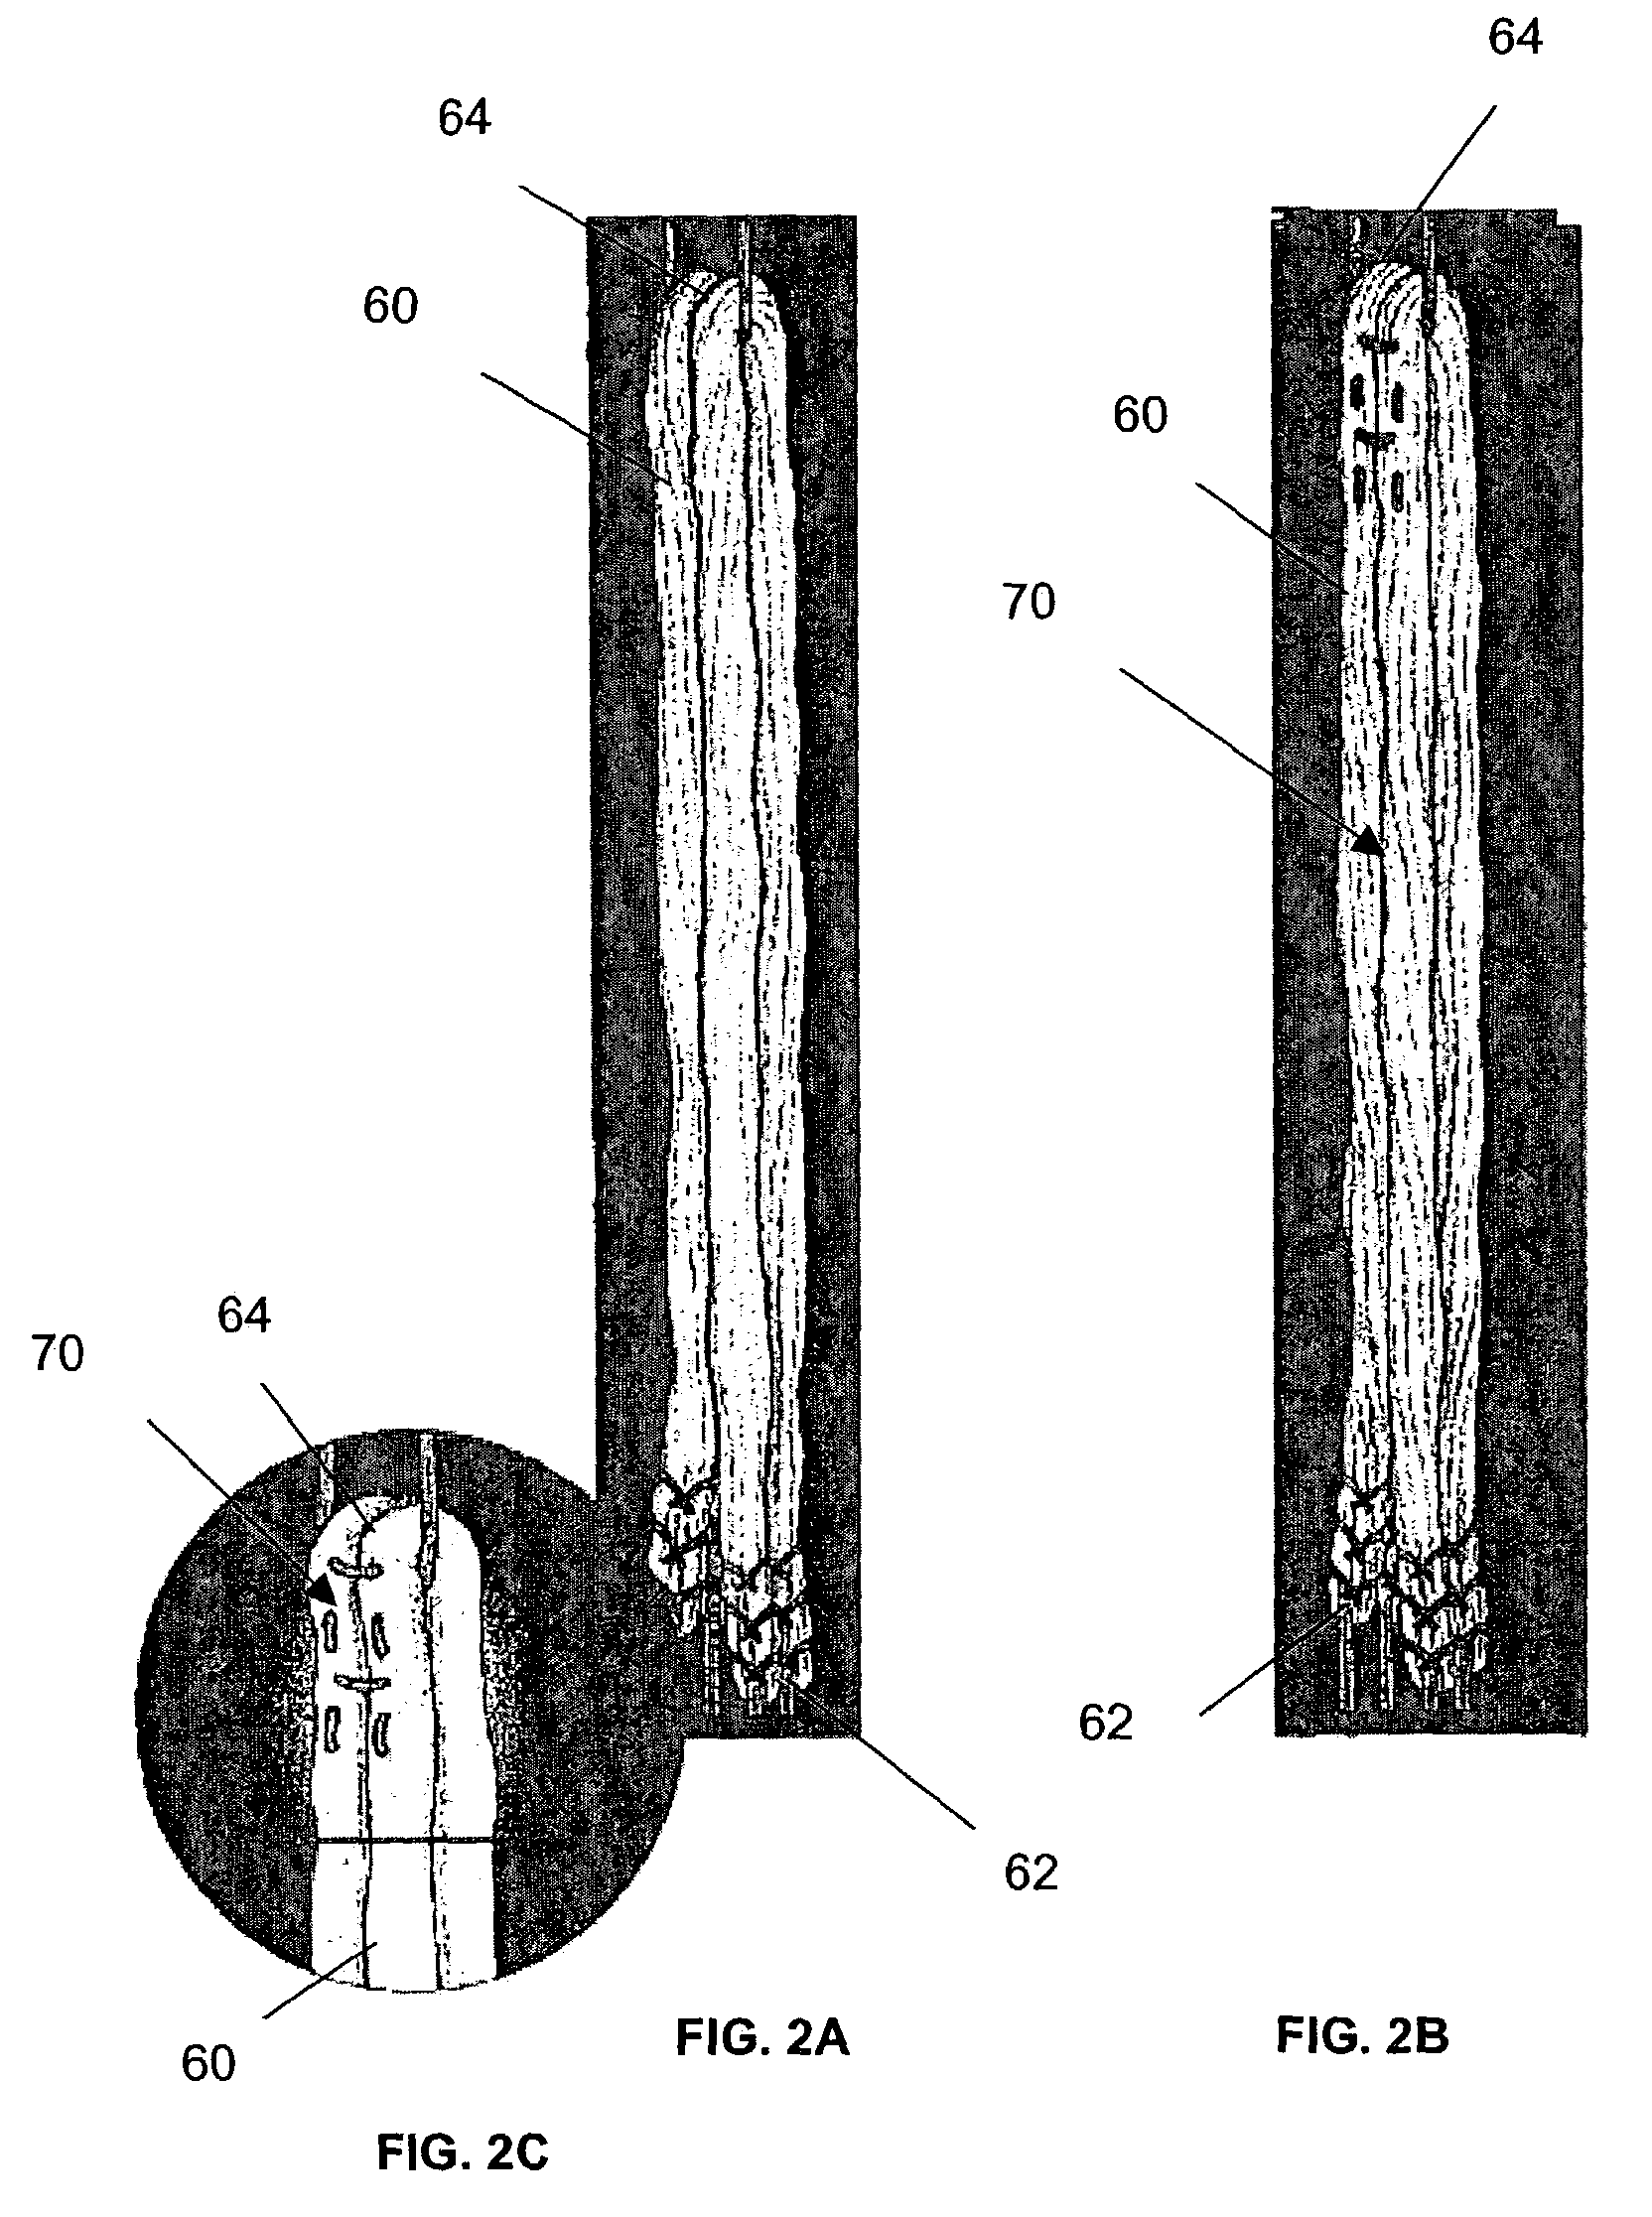 Adjustable drill guide assembly and method of use